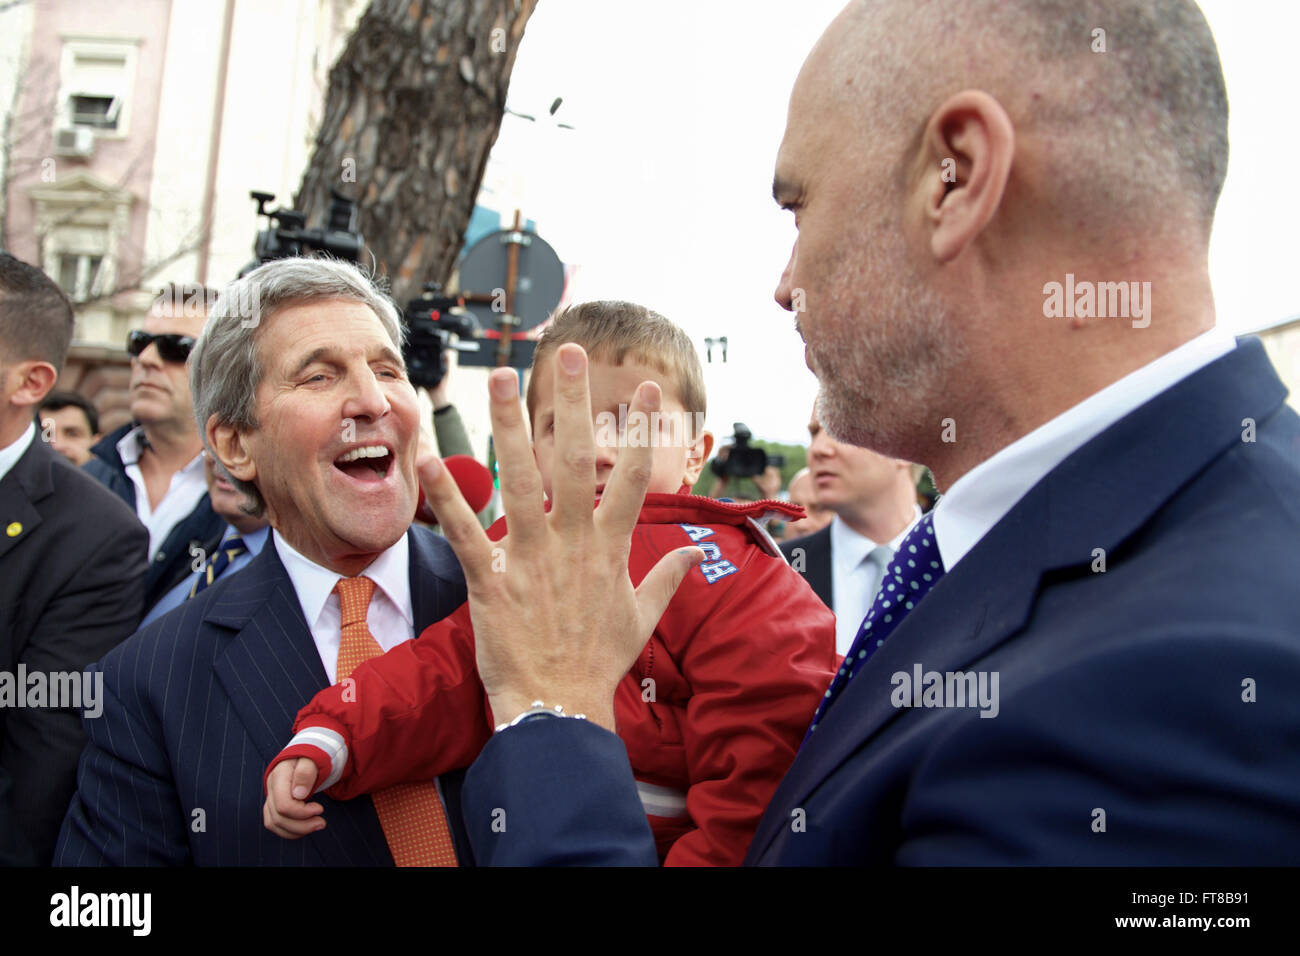 U.S. Secretary of State John Kerry laughs as Albanian Prime Minister Edi Rama tells him the age of a five-year-old child he plucked from the crowd outside the Prime Ministry in Tirana, Albania, following their bilateral meeting on February 14, 2016. [State Department photo/ Public Domain] Stock Photo